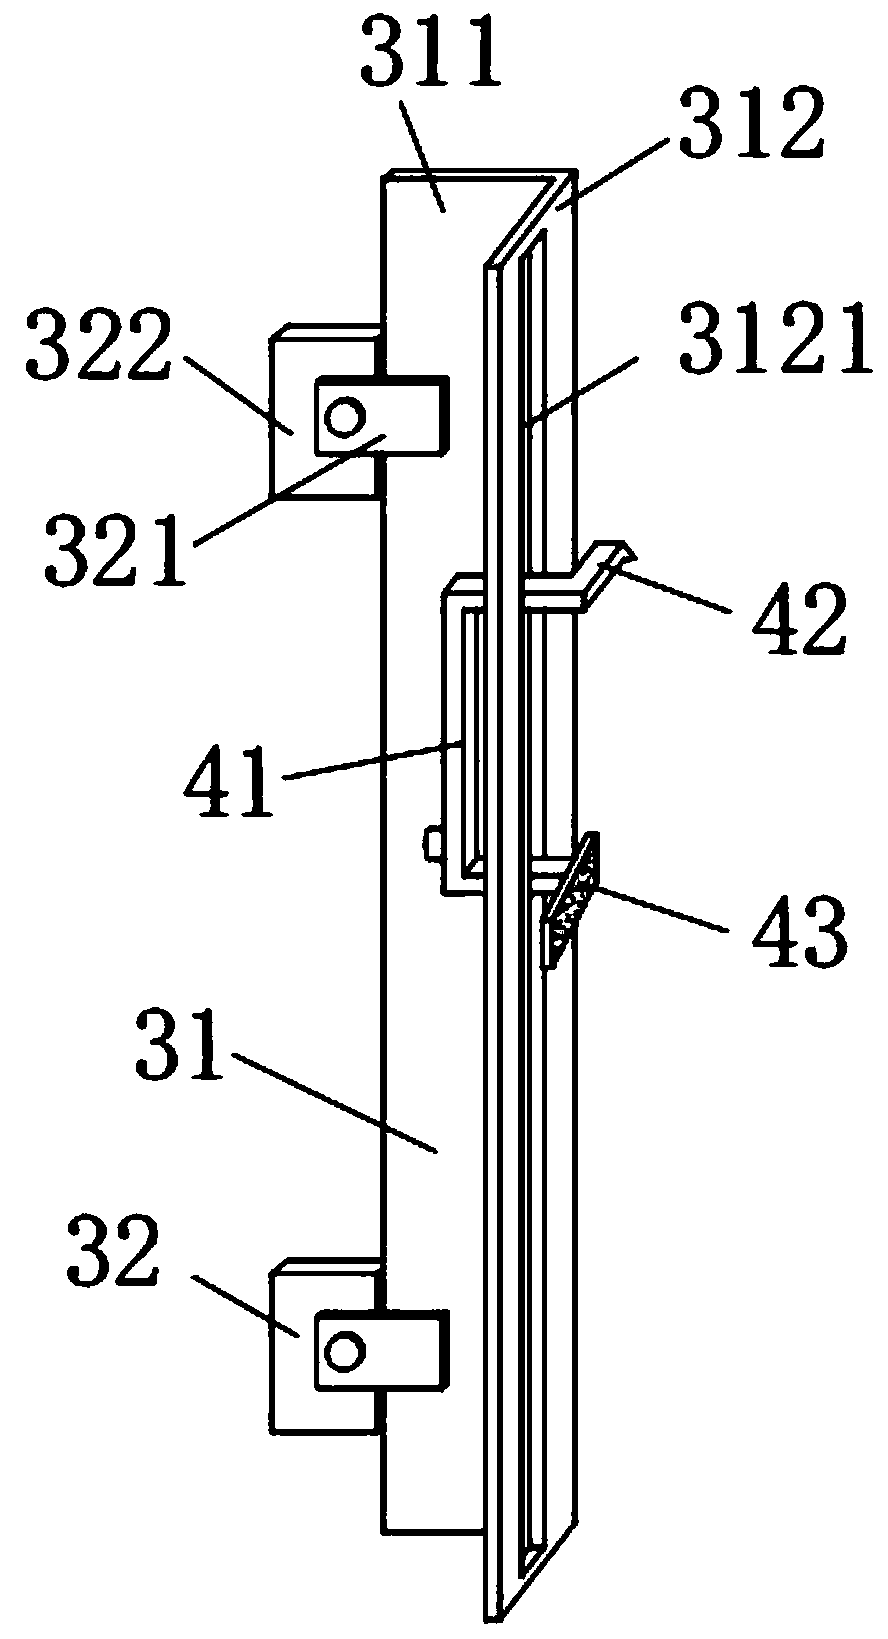 Welding assisting guiding device